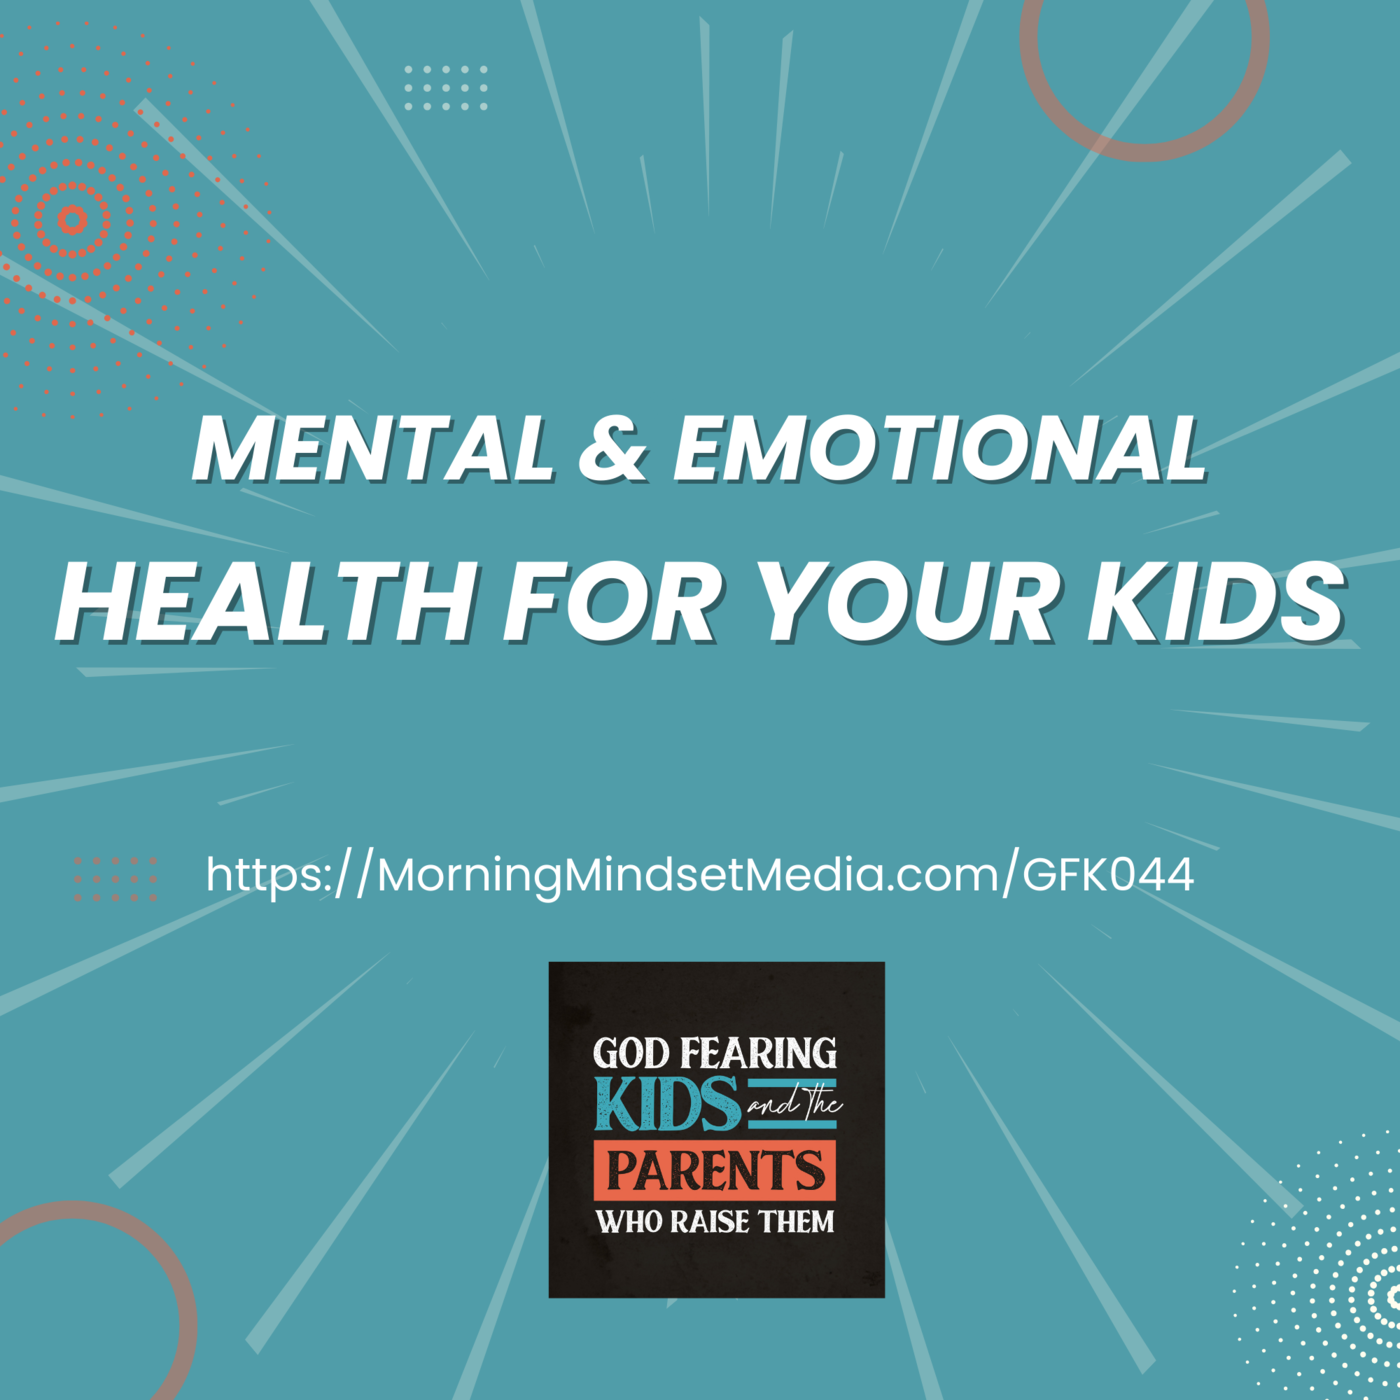 044: Mental and emotional health for your children through creating an orderly life (Christian parenting)